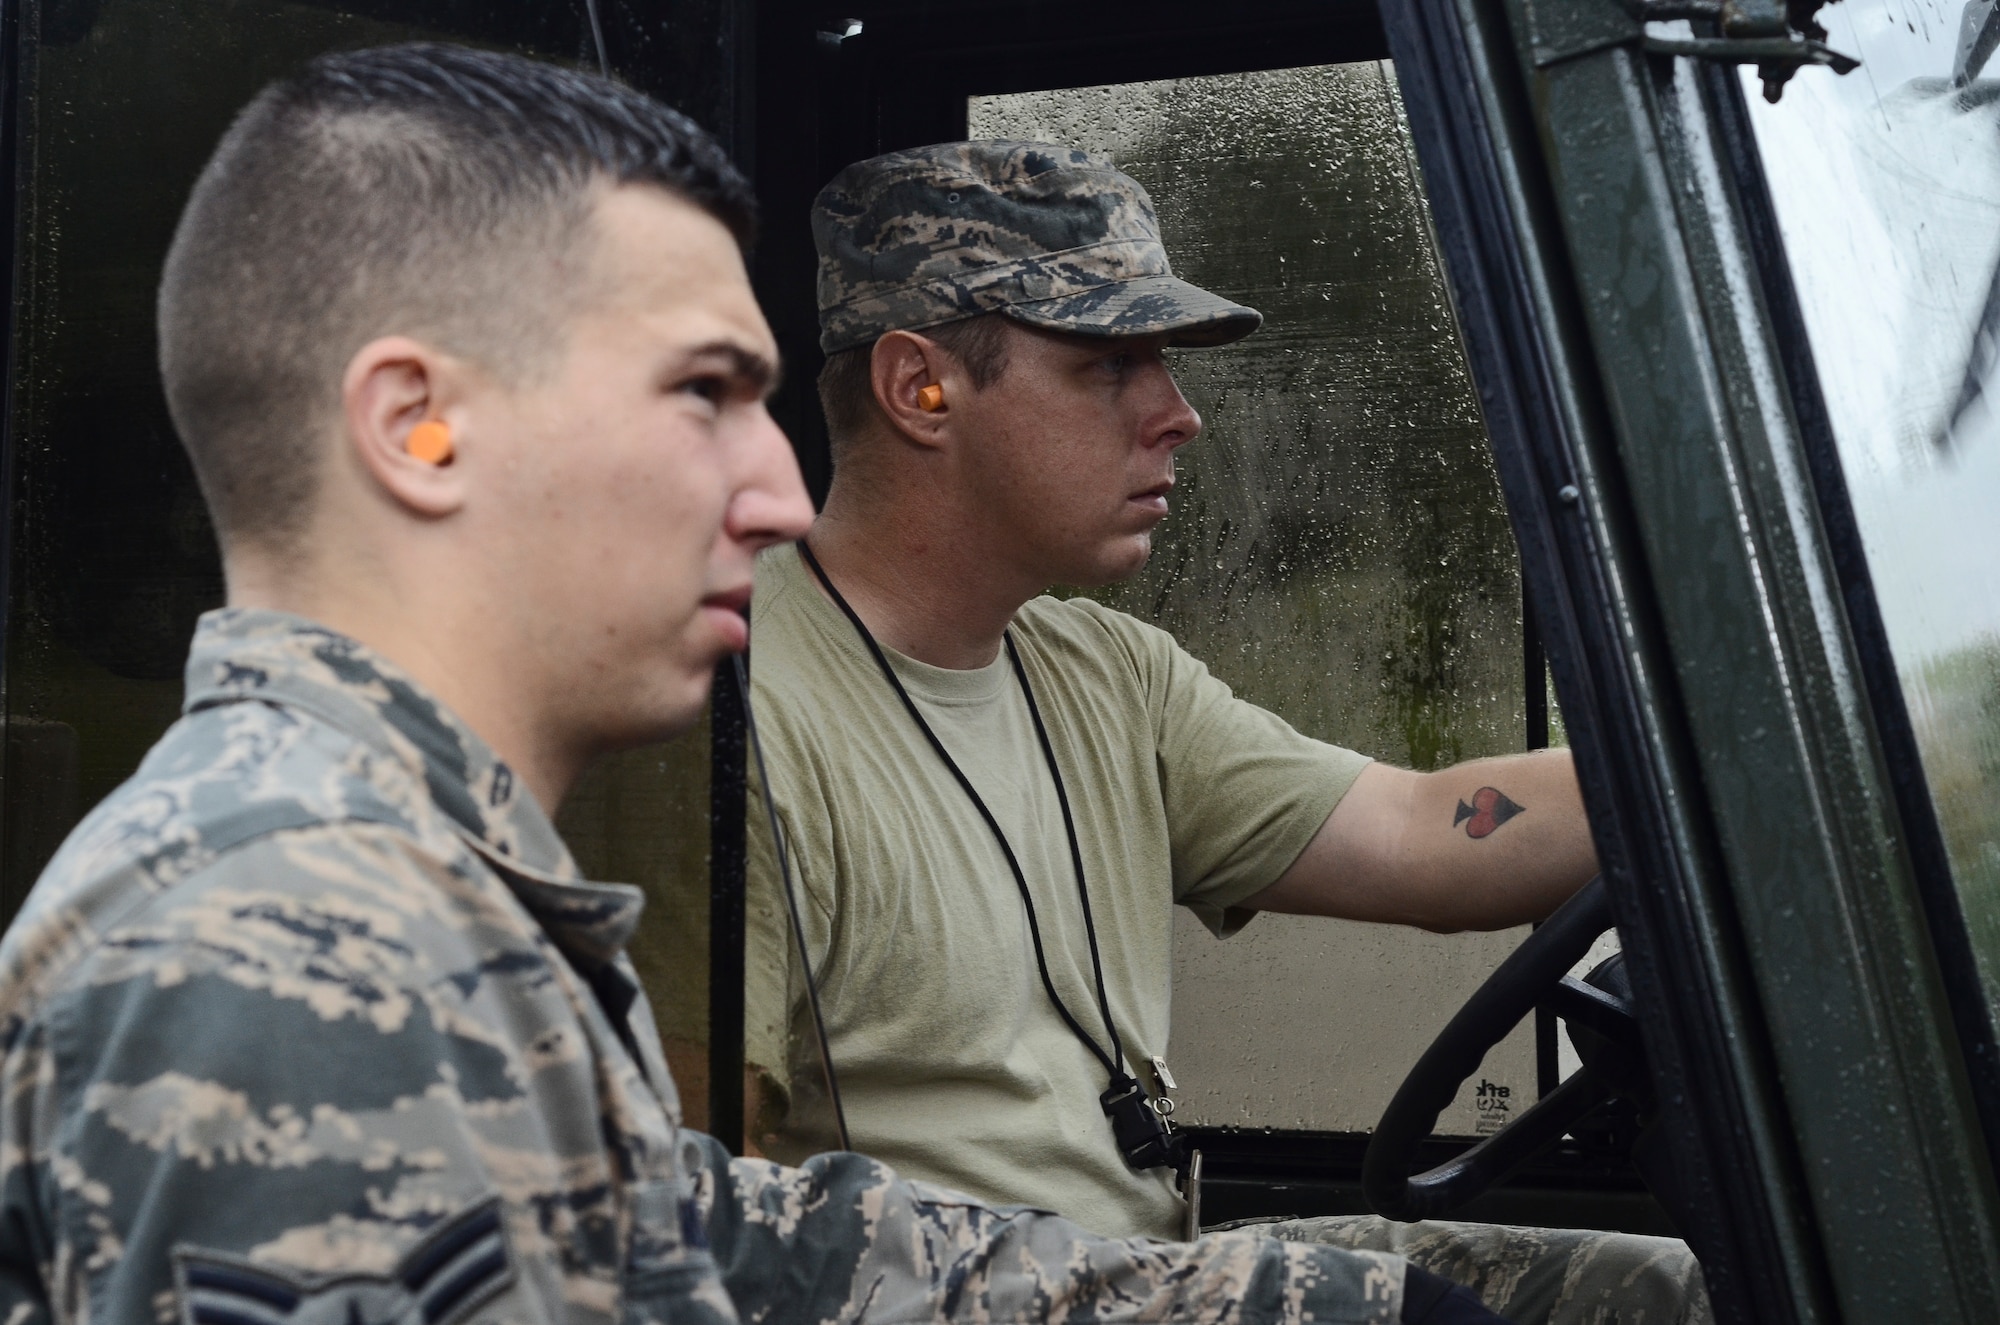 Senior Airman Brian Fish (left), listens to Airman 1st Class Jack Mowery (right), both 36th Munitions Squadron Material Flight storage crew members, as he explains where to drop a pallet of guidance controlled units July 30, 2014, on Andersen Air Force Base, Guam. The 36th MUNS is home to the largest munition stock pile in the world, valued at $1.3 billion, the material flight also ensures proper storage practices are utilized, inspect and maintain the munitions and ensure accountability of over 9 million individual items. (U.S. Air Force photo by Staff Sgt. Robert Hicks/Released)